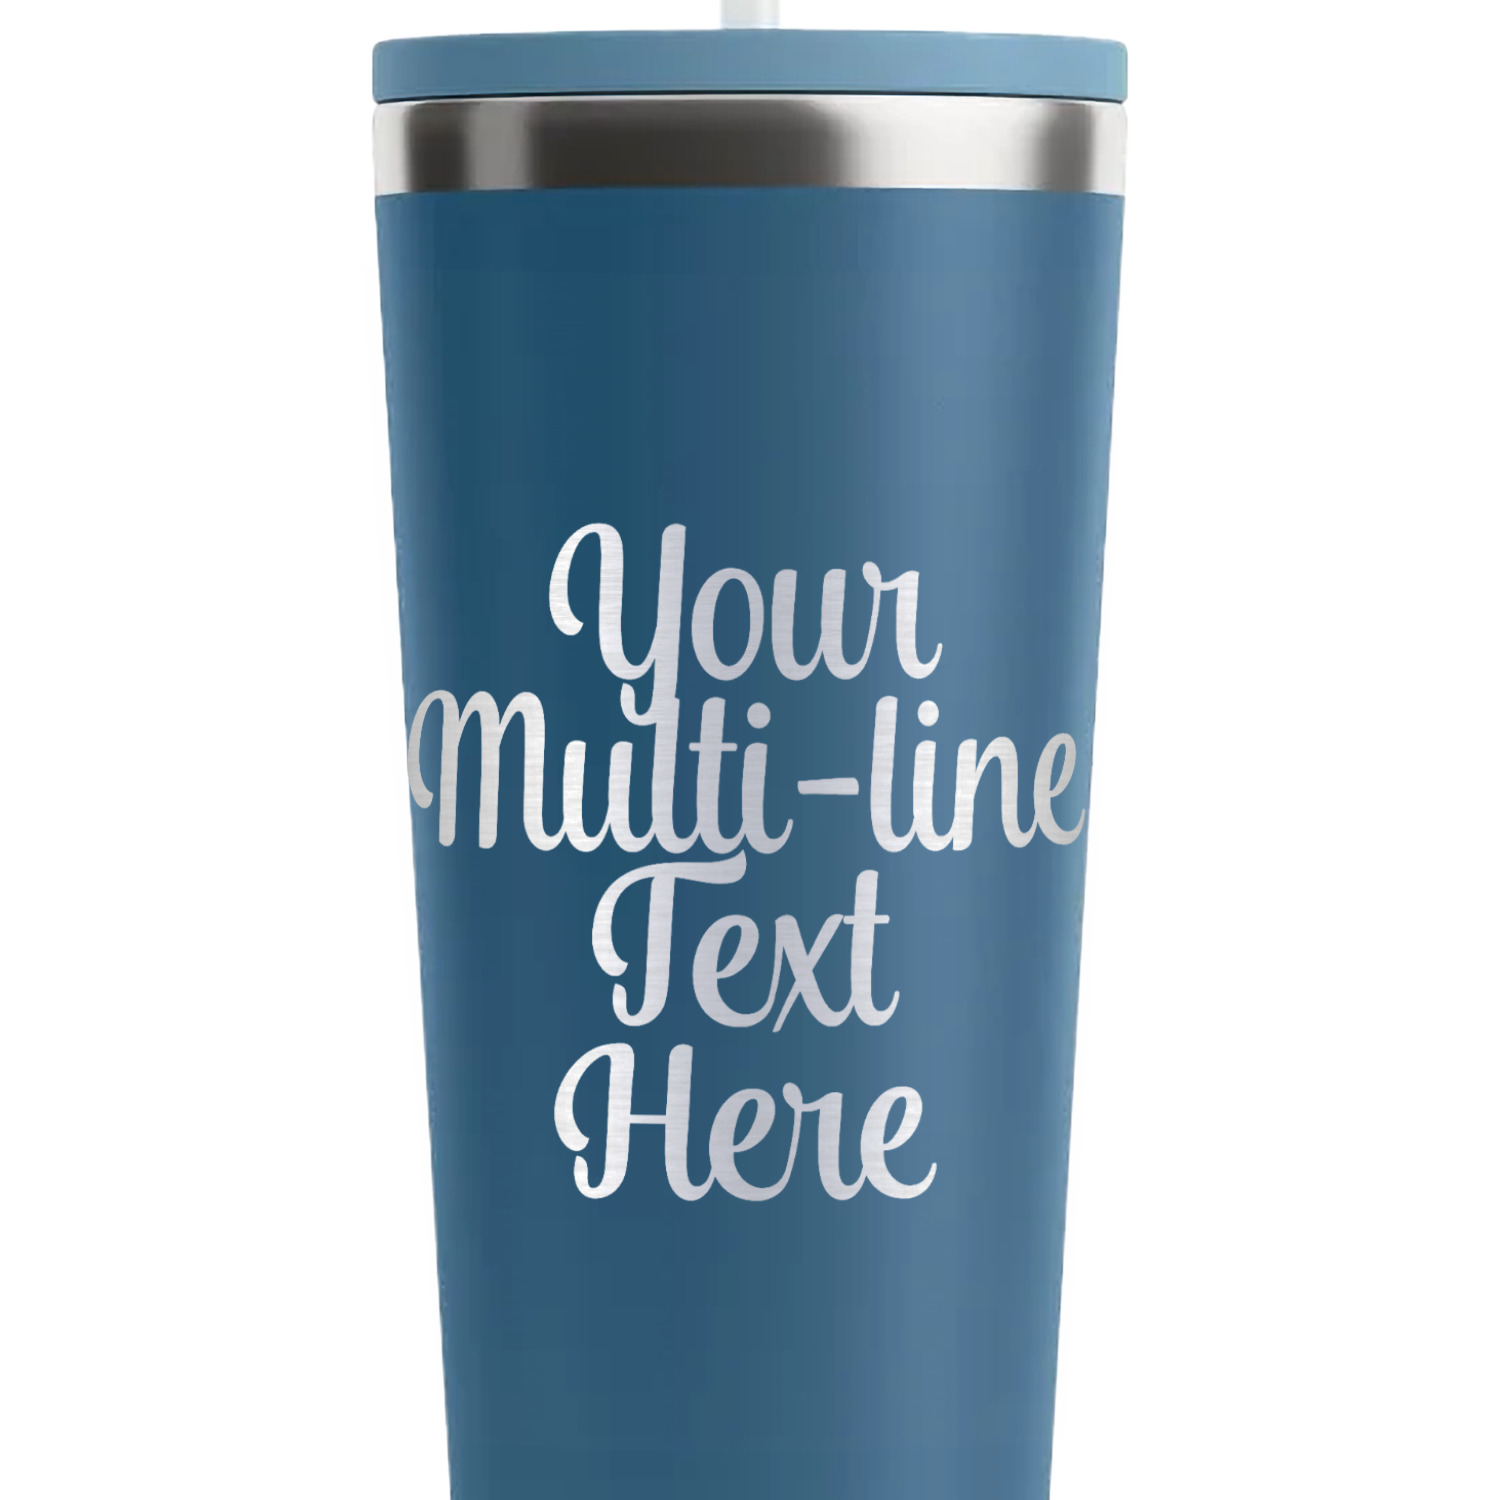 https://www.youcustomizeit.com/common/MAKE/837471/Multiline-Text-Steel-Blue-RTIC-Everyday-Tumbler-28-oz-Close-Up.jpg?lm=1698259272